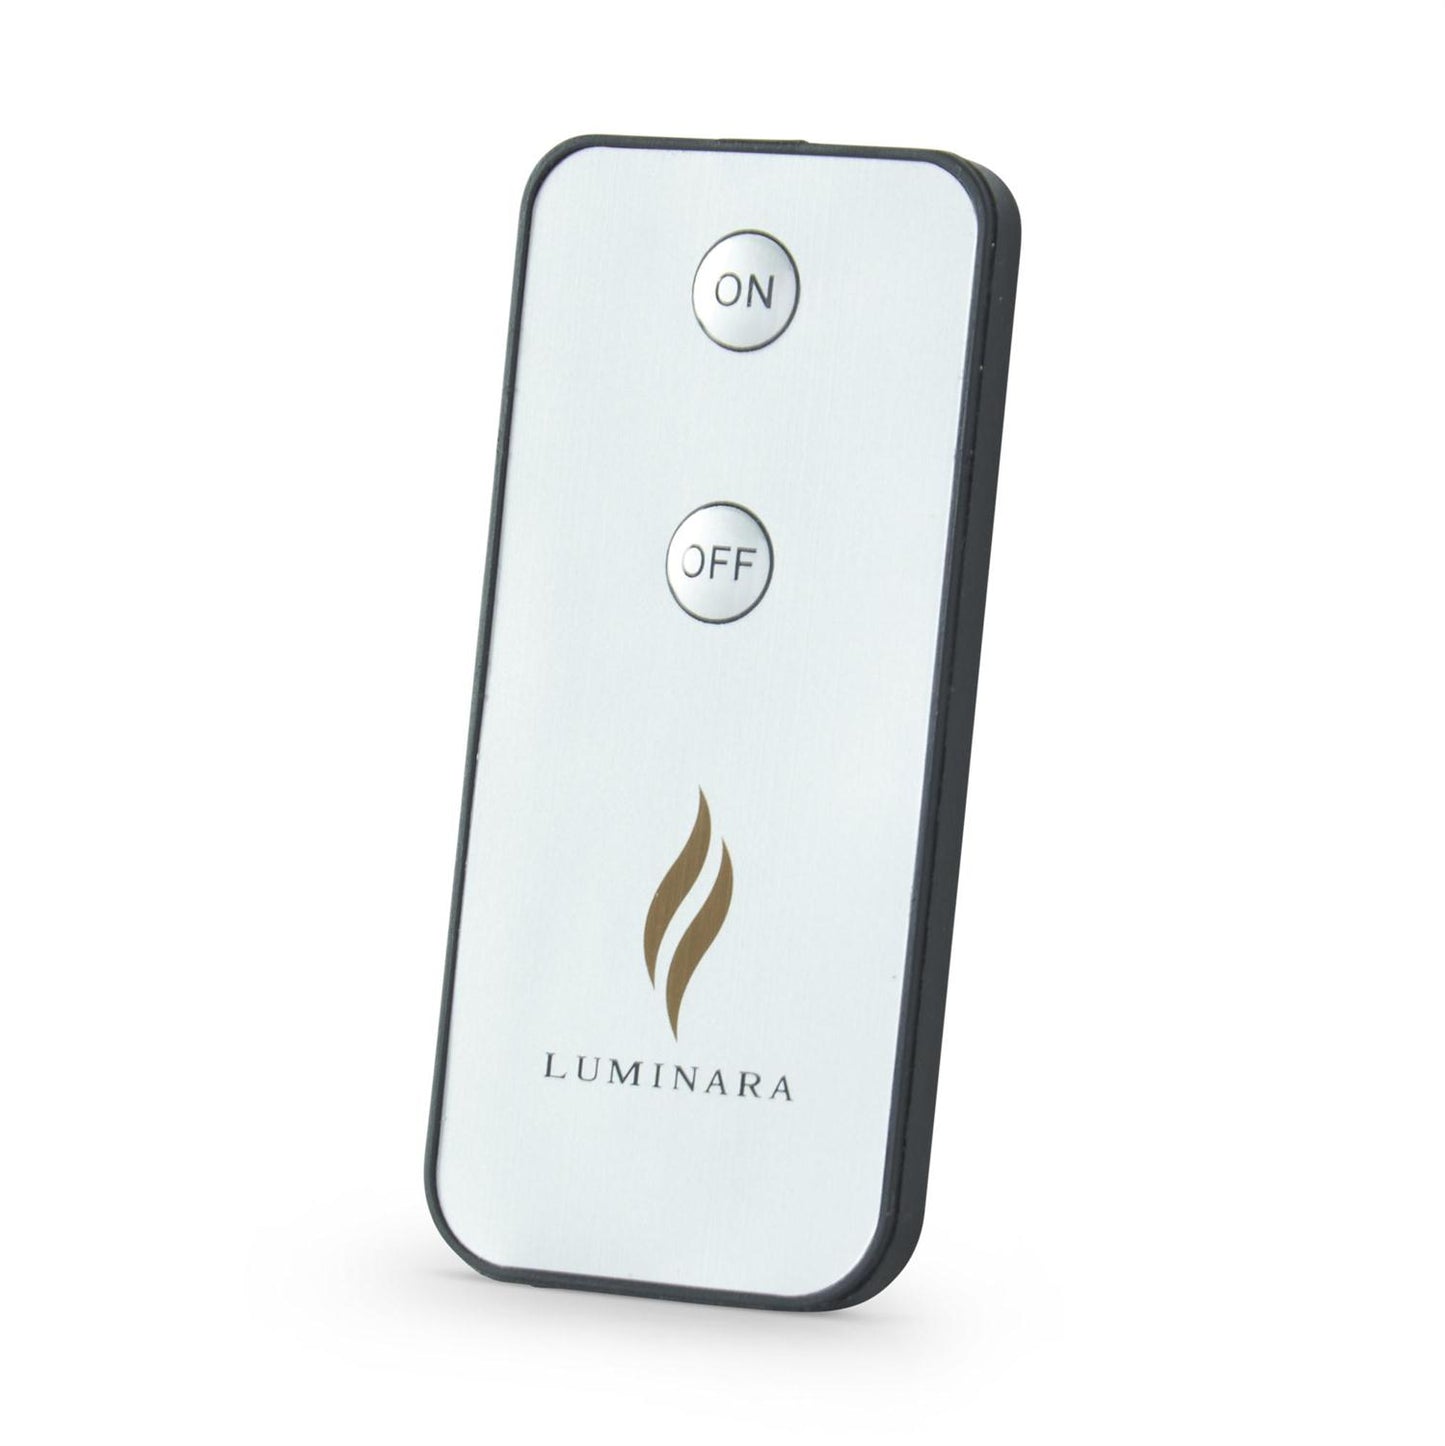 Remote for Luminara Flameless Candle